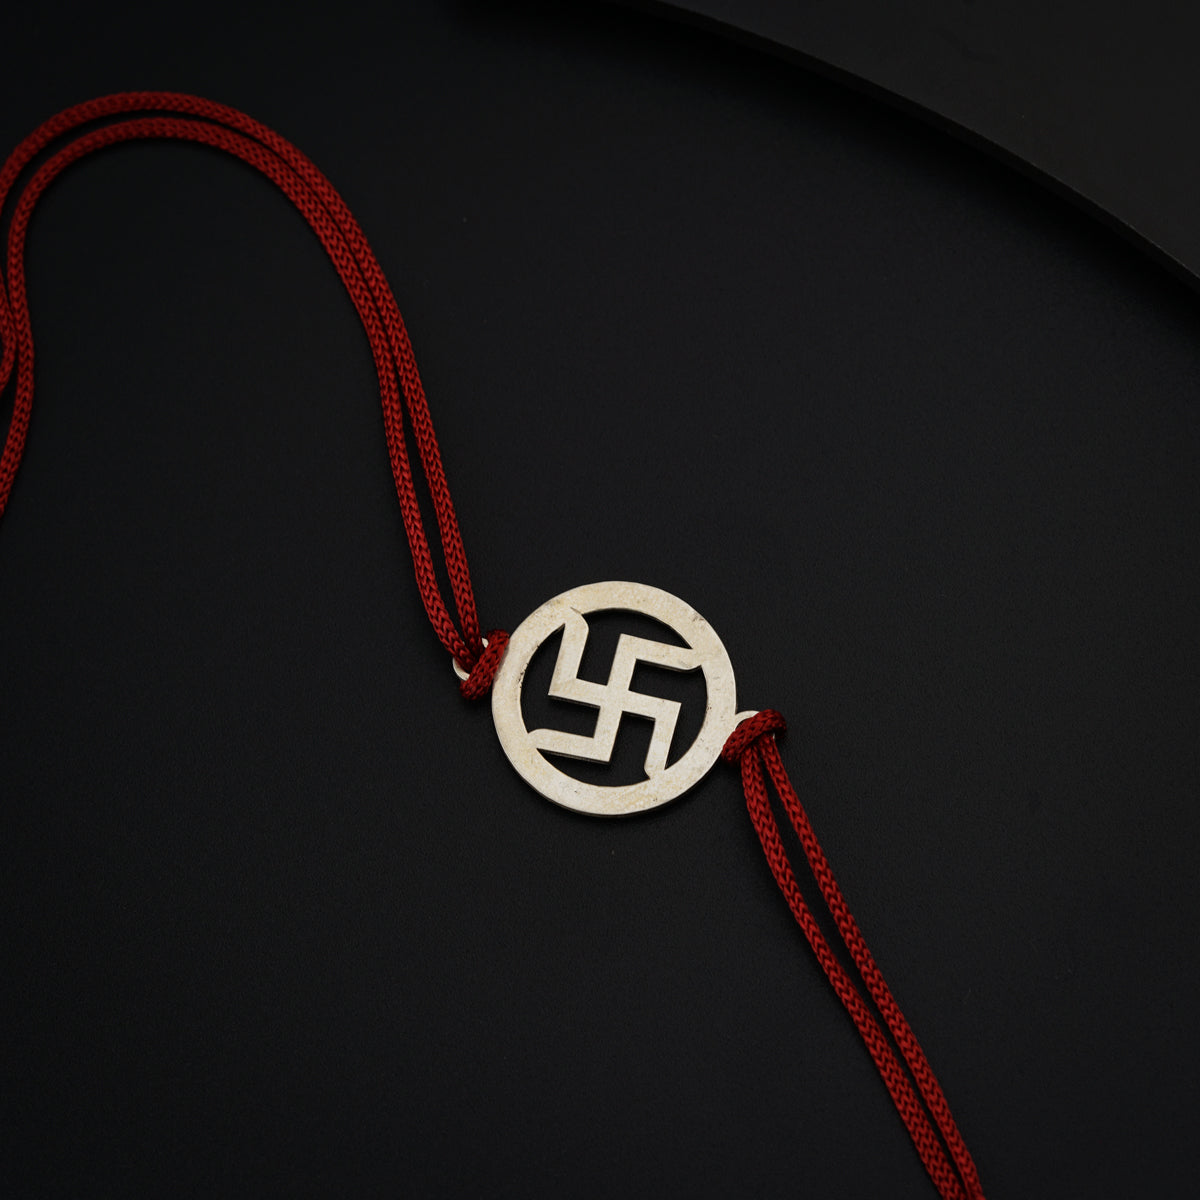 a red string with a silver pendant on it